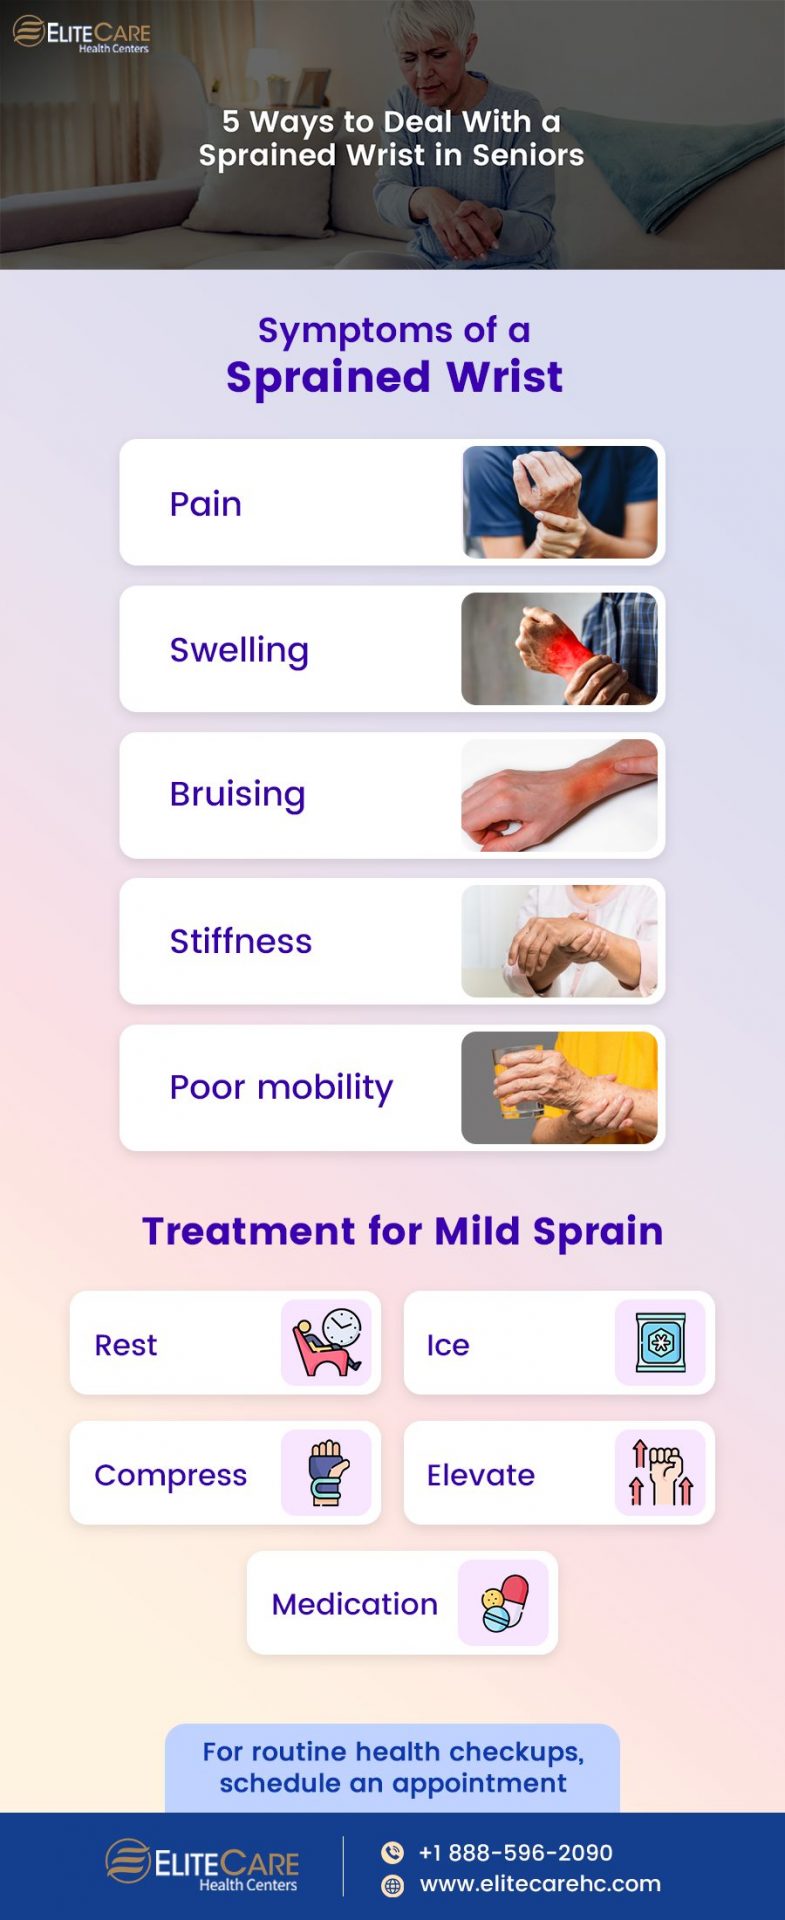 5 Ways to Deal with a Sprained Wrist in Seniors | Infographic